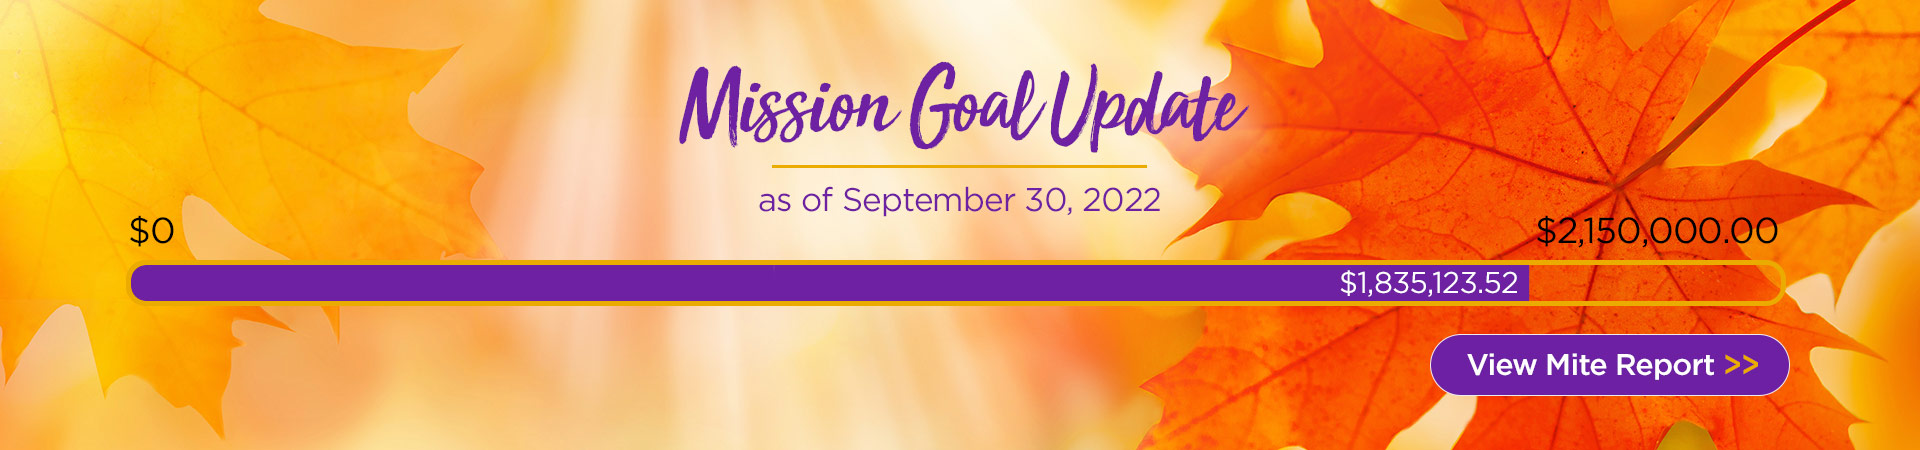 Mission Goal Update as of September 30, 2022. View Mite Report.